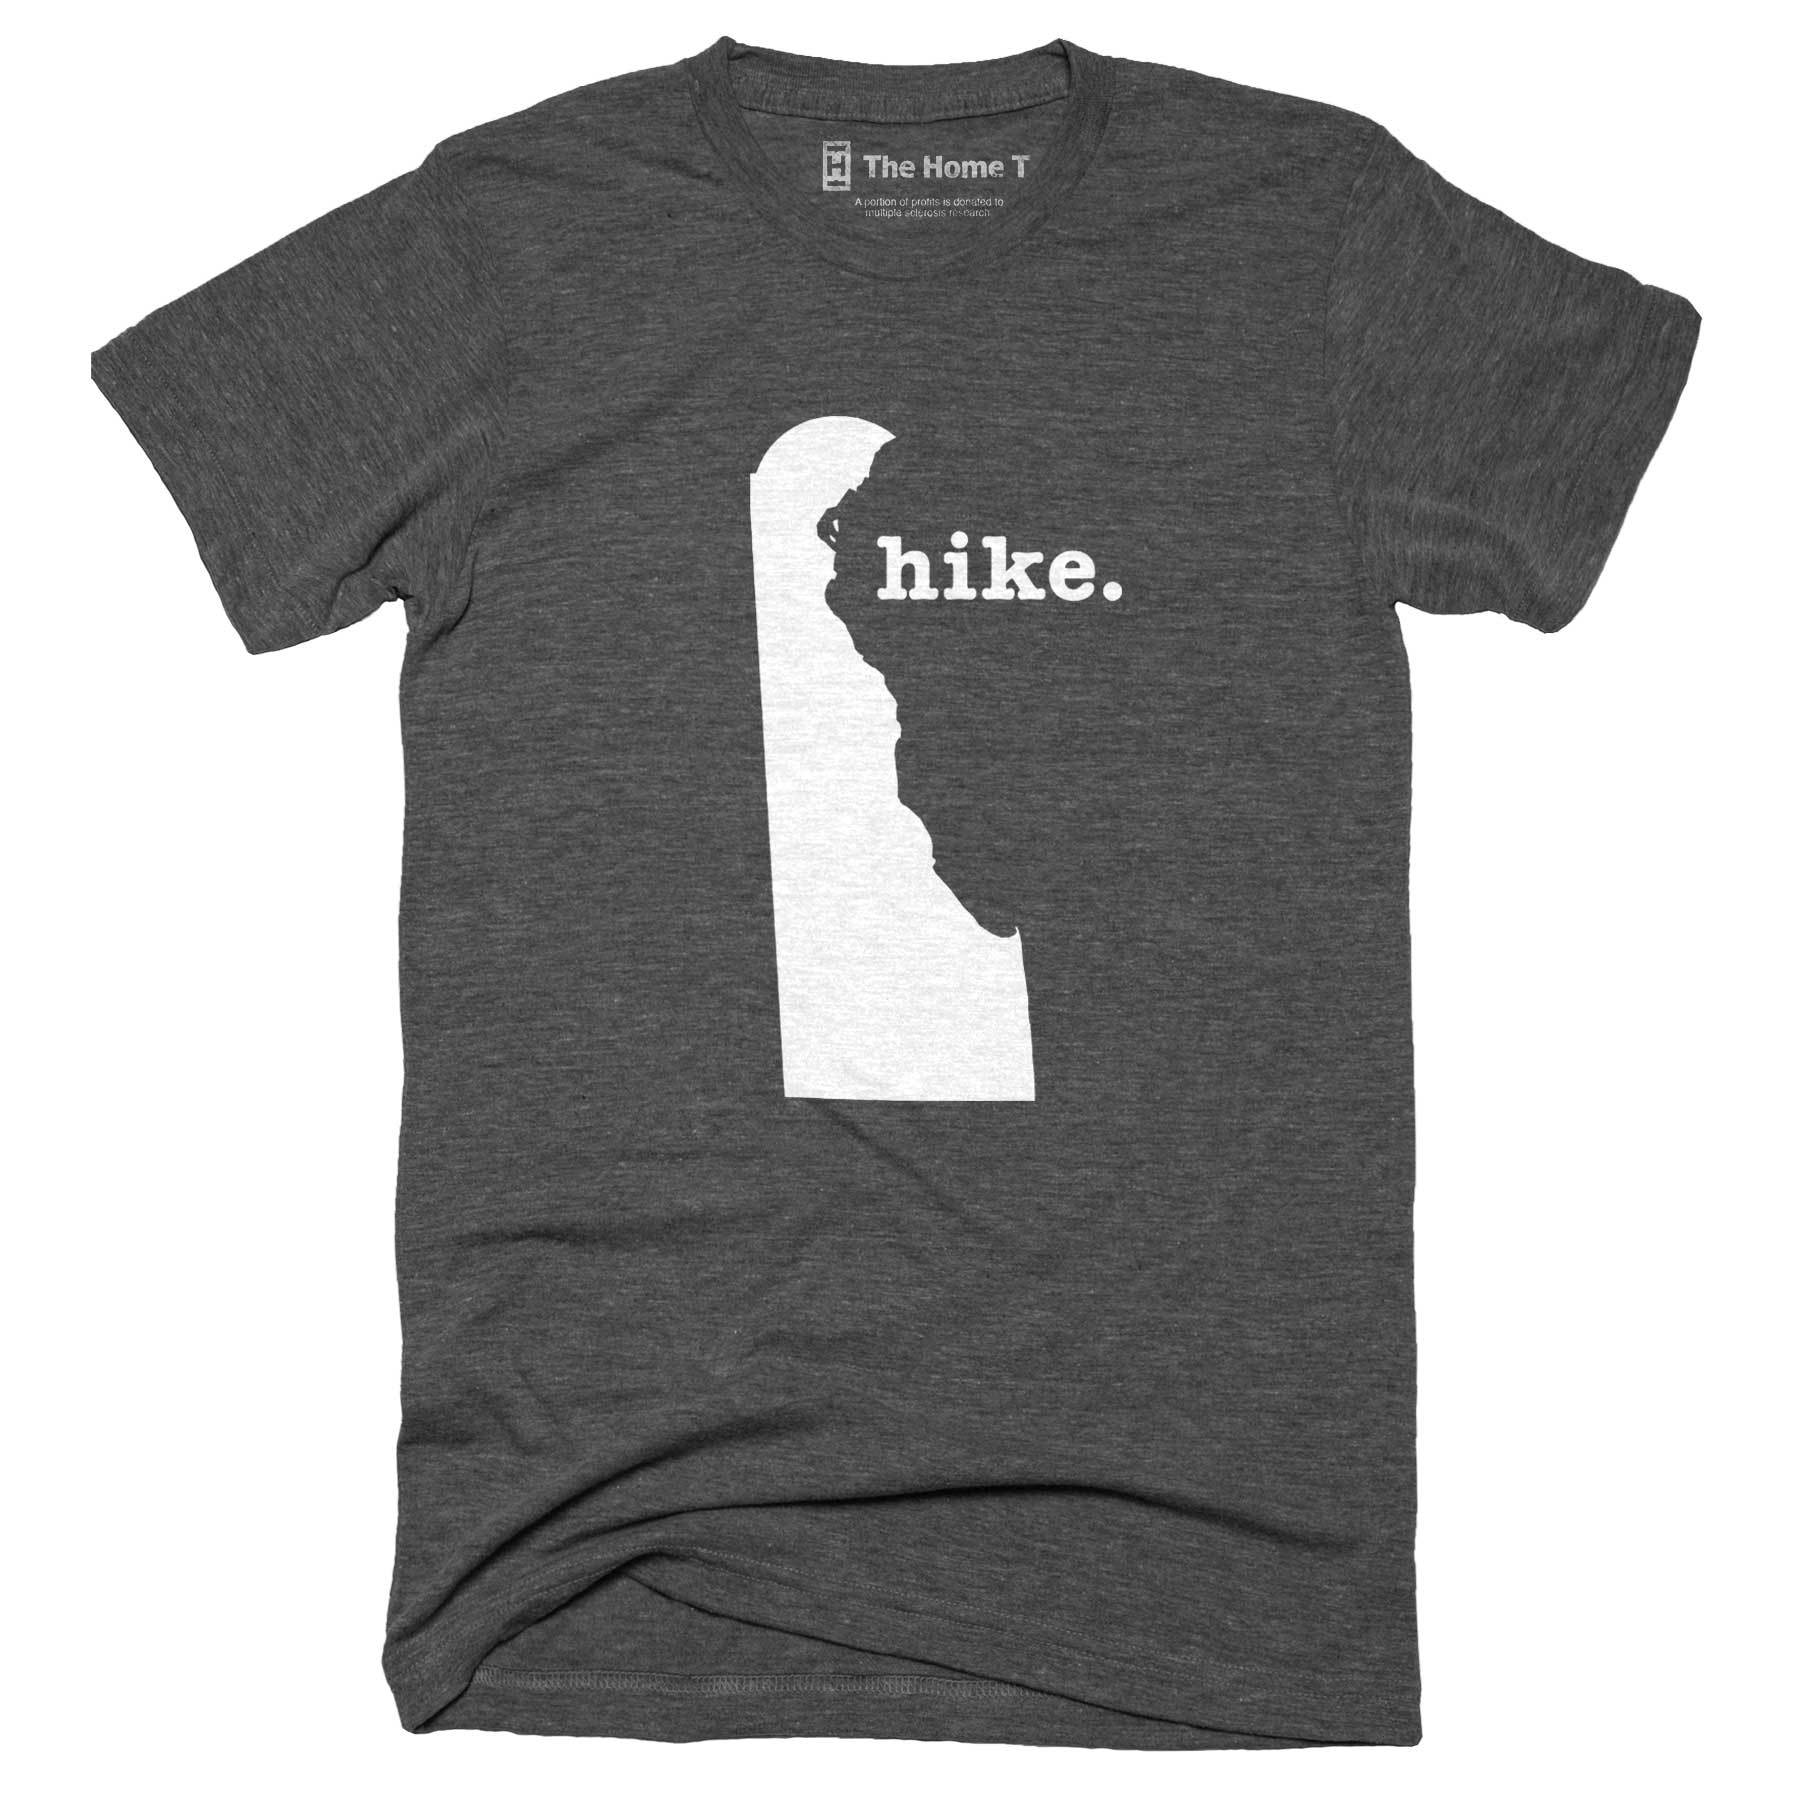 Delaware Hike Home T-Shirt Outdoor Collection The Home T XXL Grey